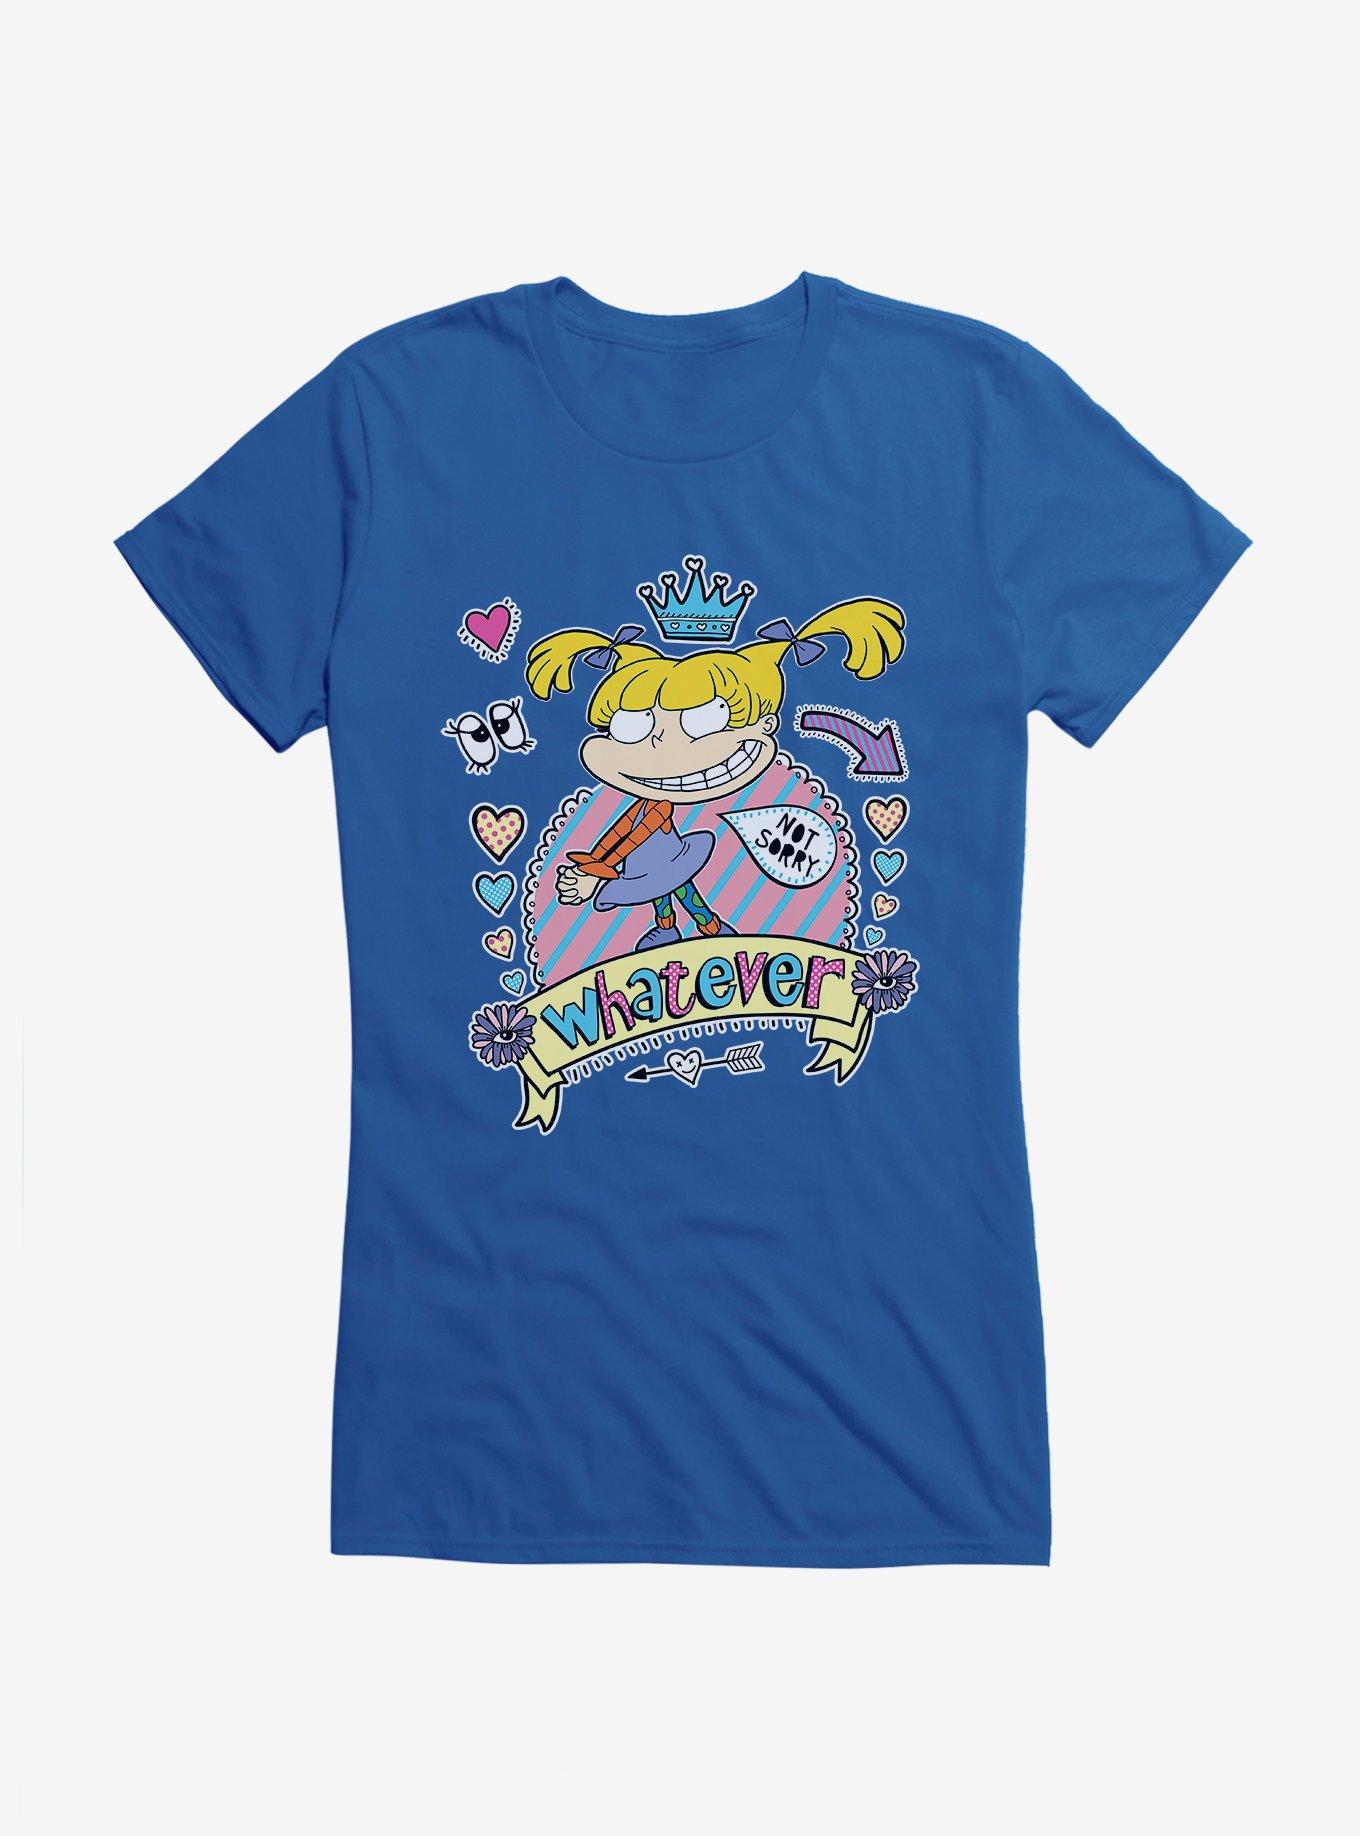 Rugrats Angelica Whatever, Not Sorry Girls T-Shirt, ROYAL, hi-res